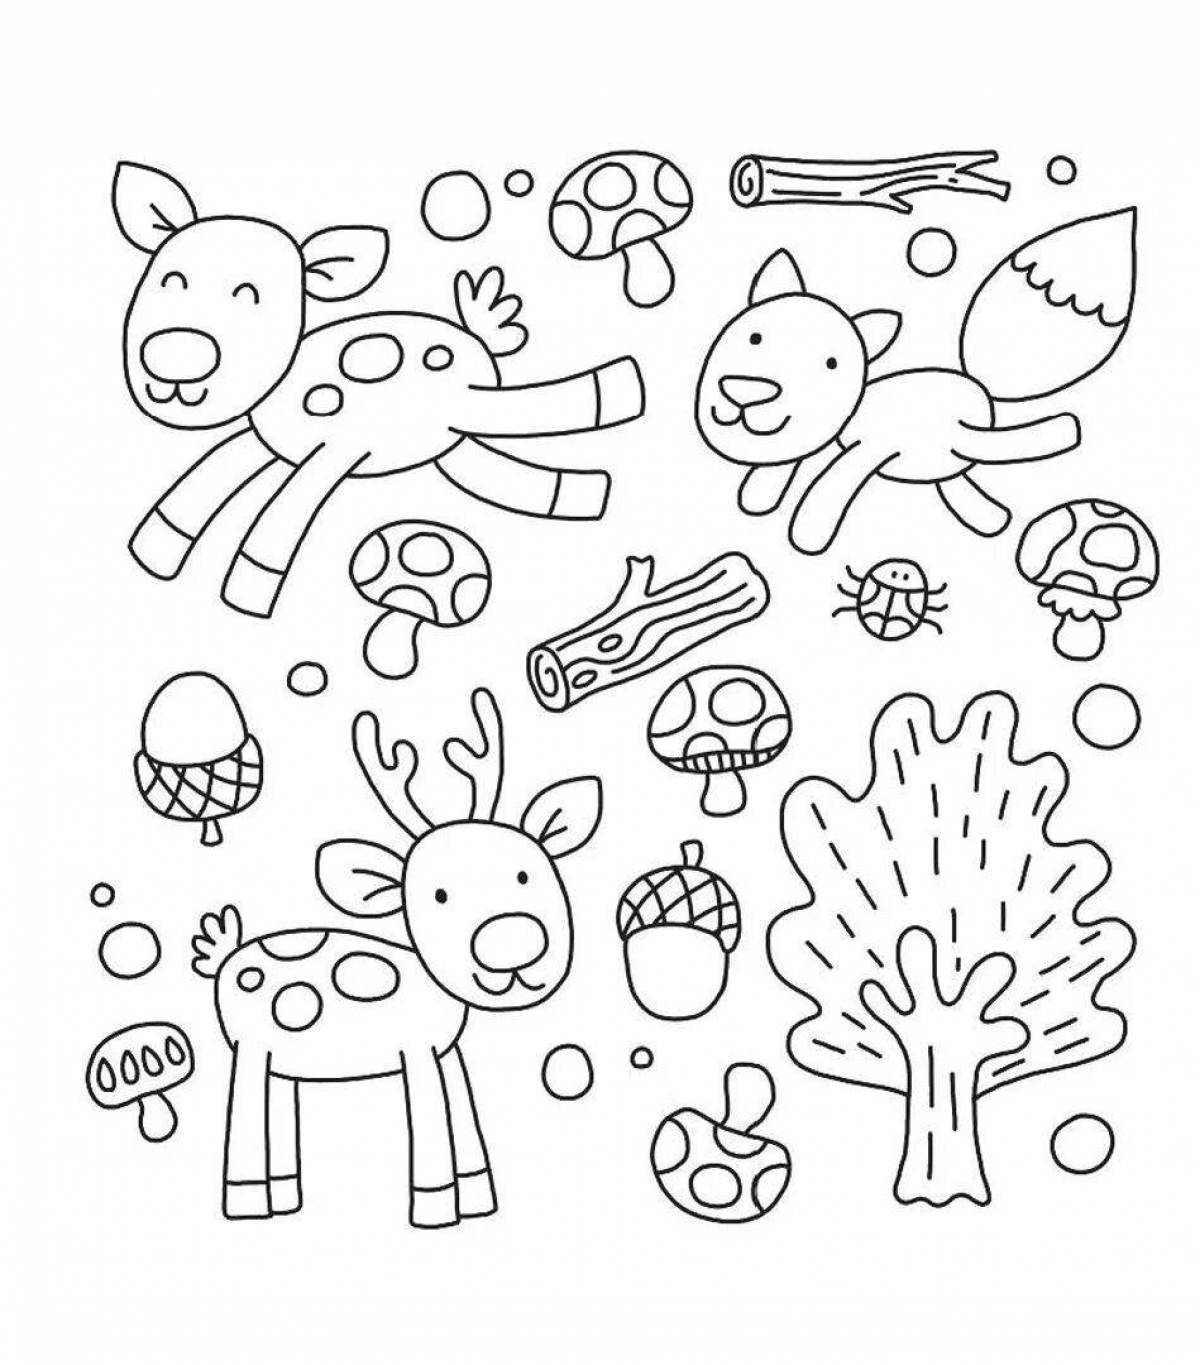 Fun coloring book with small stickers